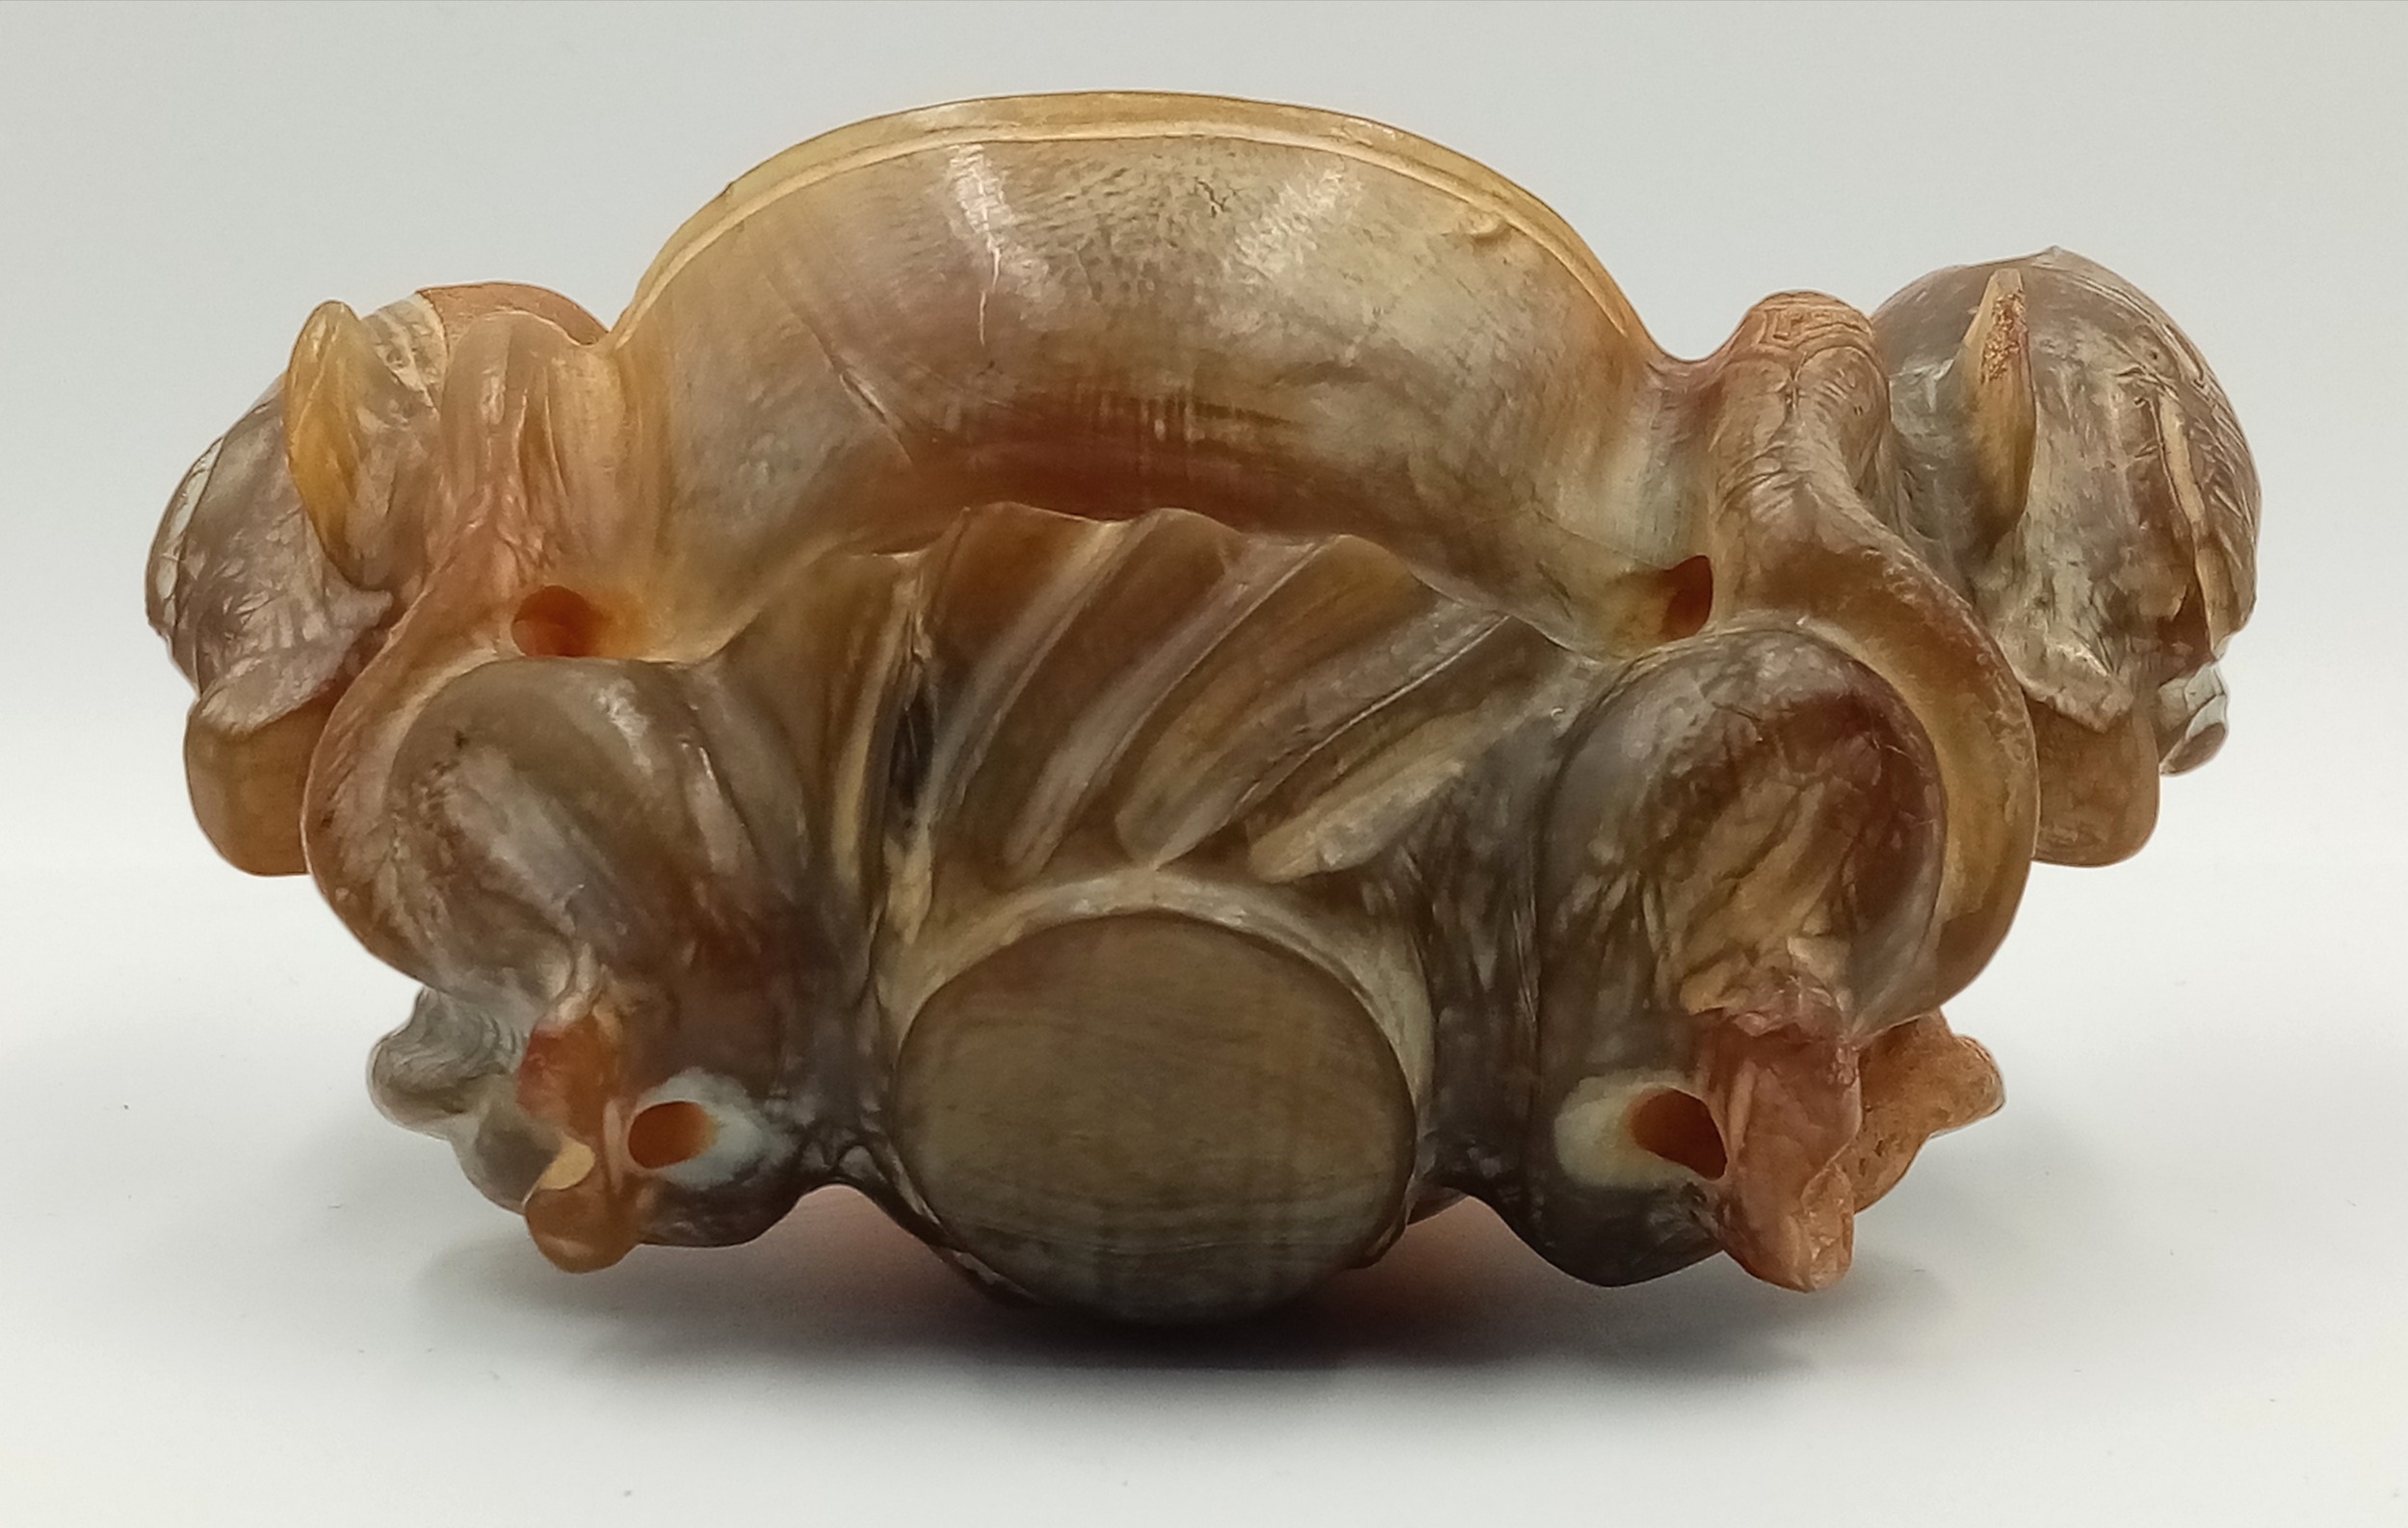 A Vintage Hand-Carved Chinese Agate Bowl with Two Ornate Men/Fish Decoration. 16 x 10cm. - Image 5 of 5